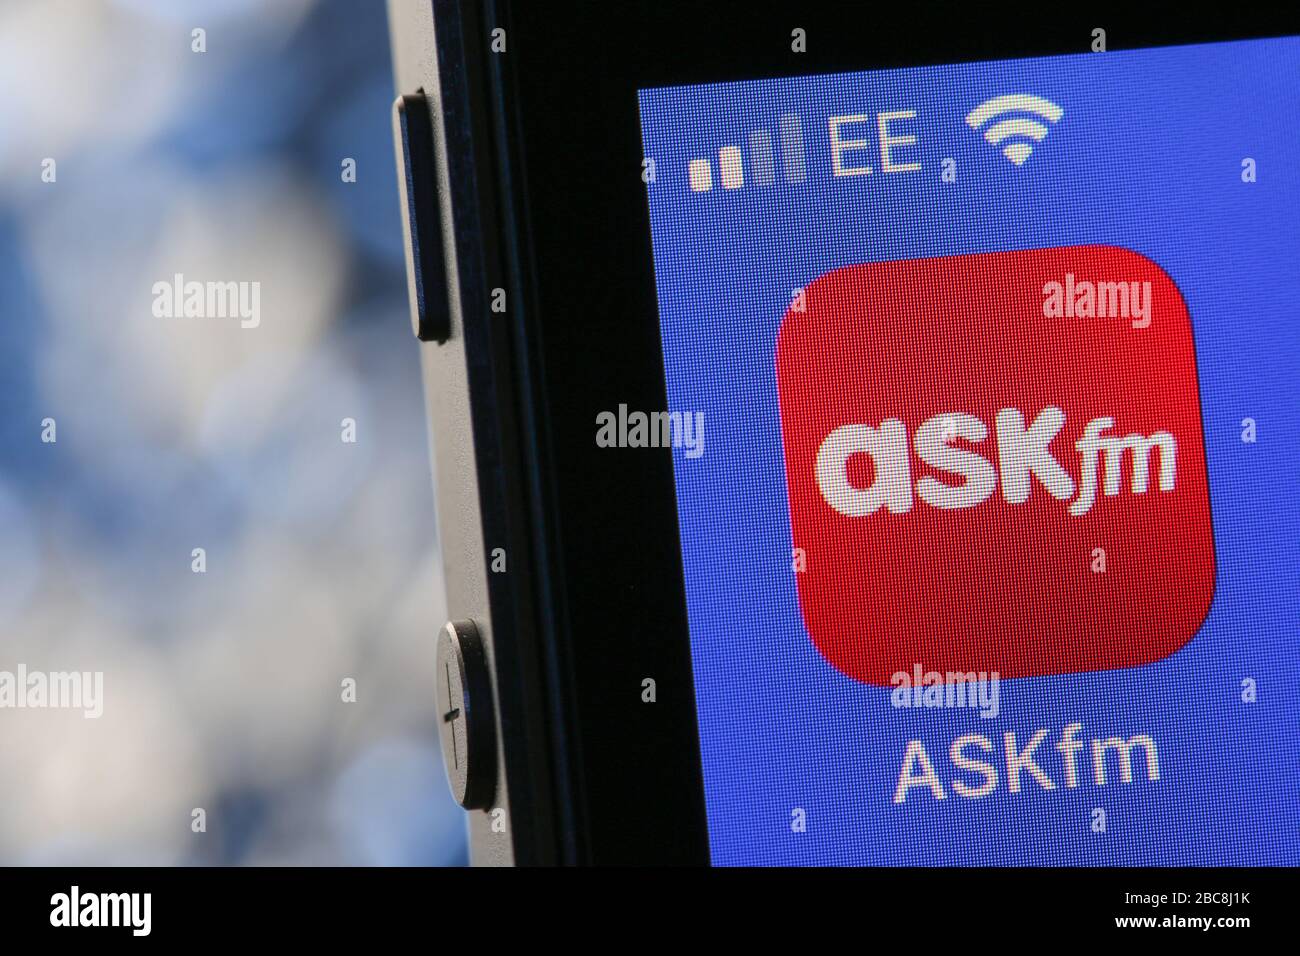 ASK.fm anonymous chat app on an iPhone. Stock Photo